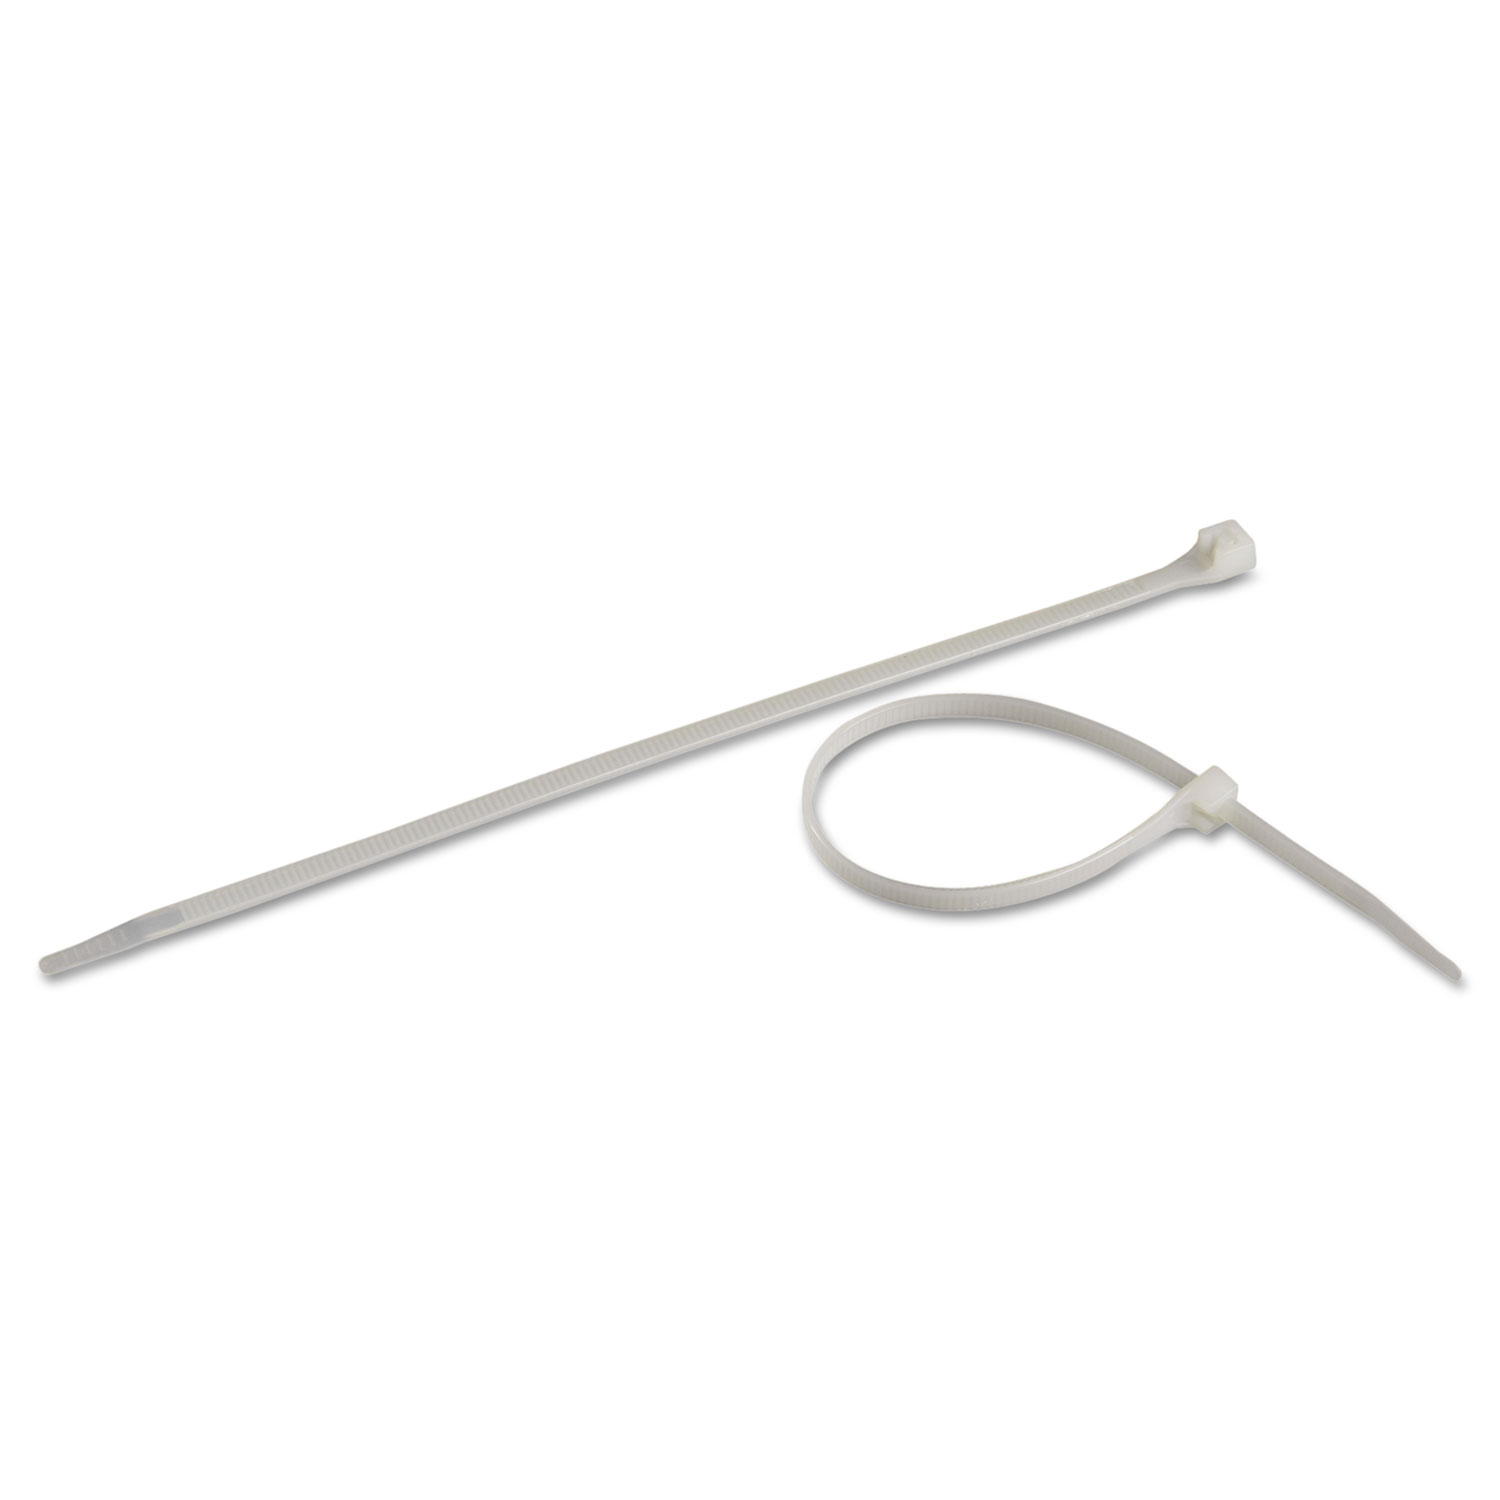 Cable Ties, 8, 75 lb, White, 1000/Pack